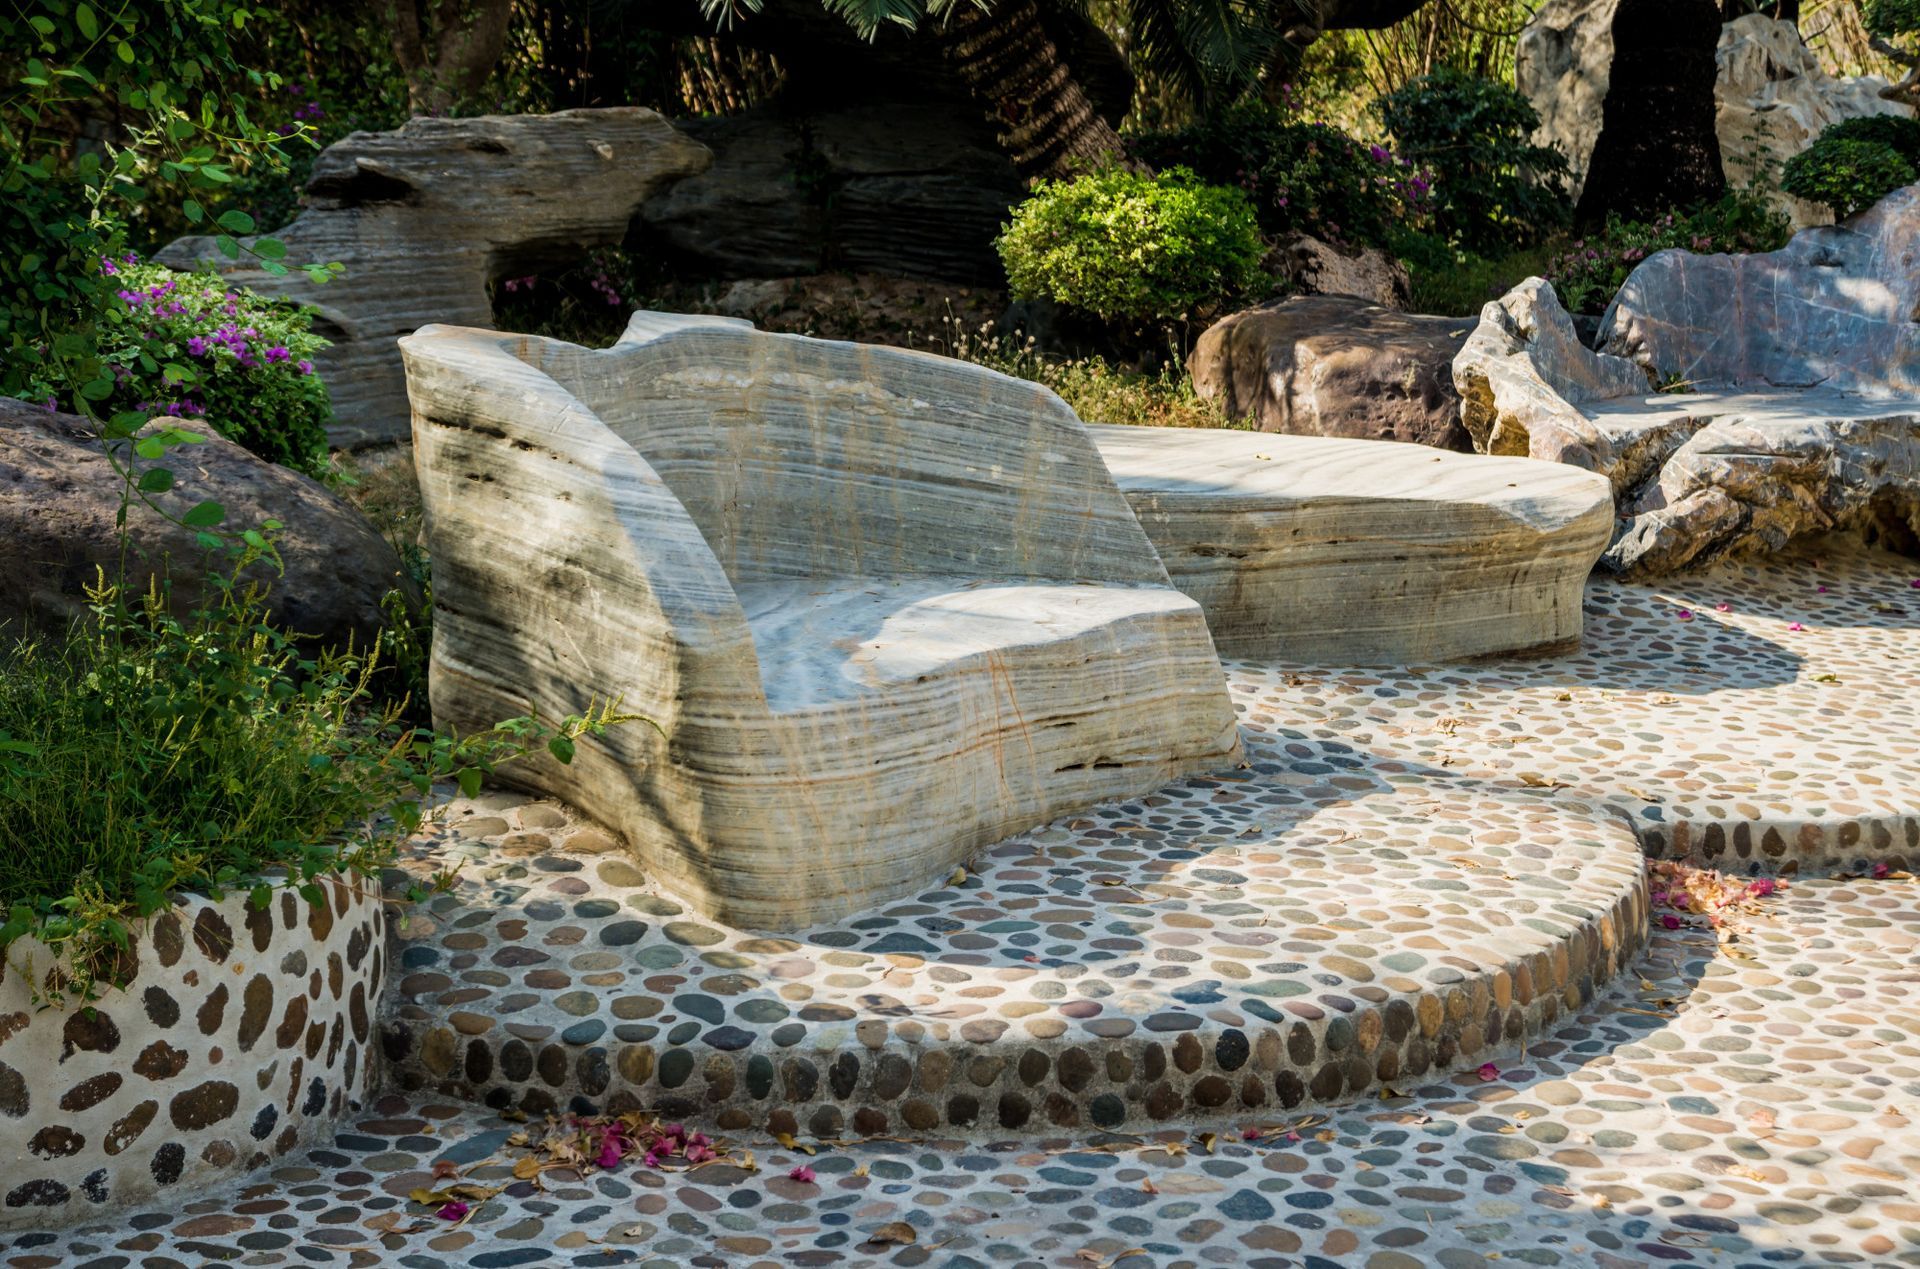 a stone bench is sitting on top of a stone walkway in a garden .